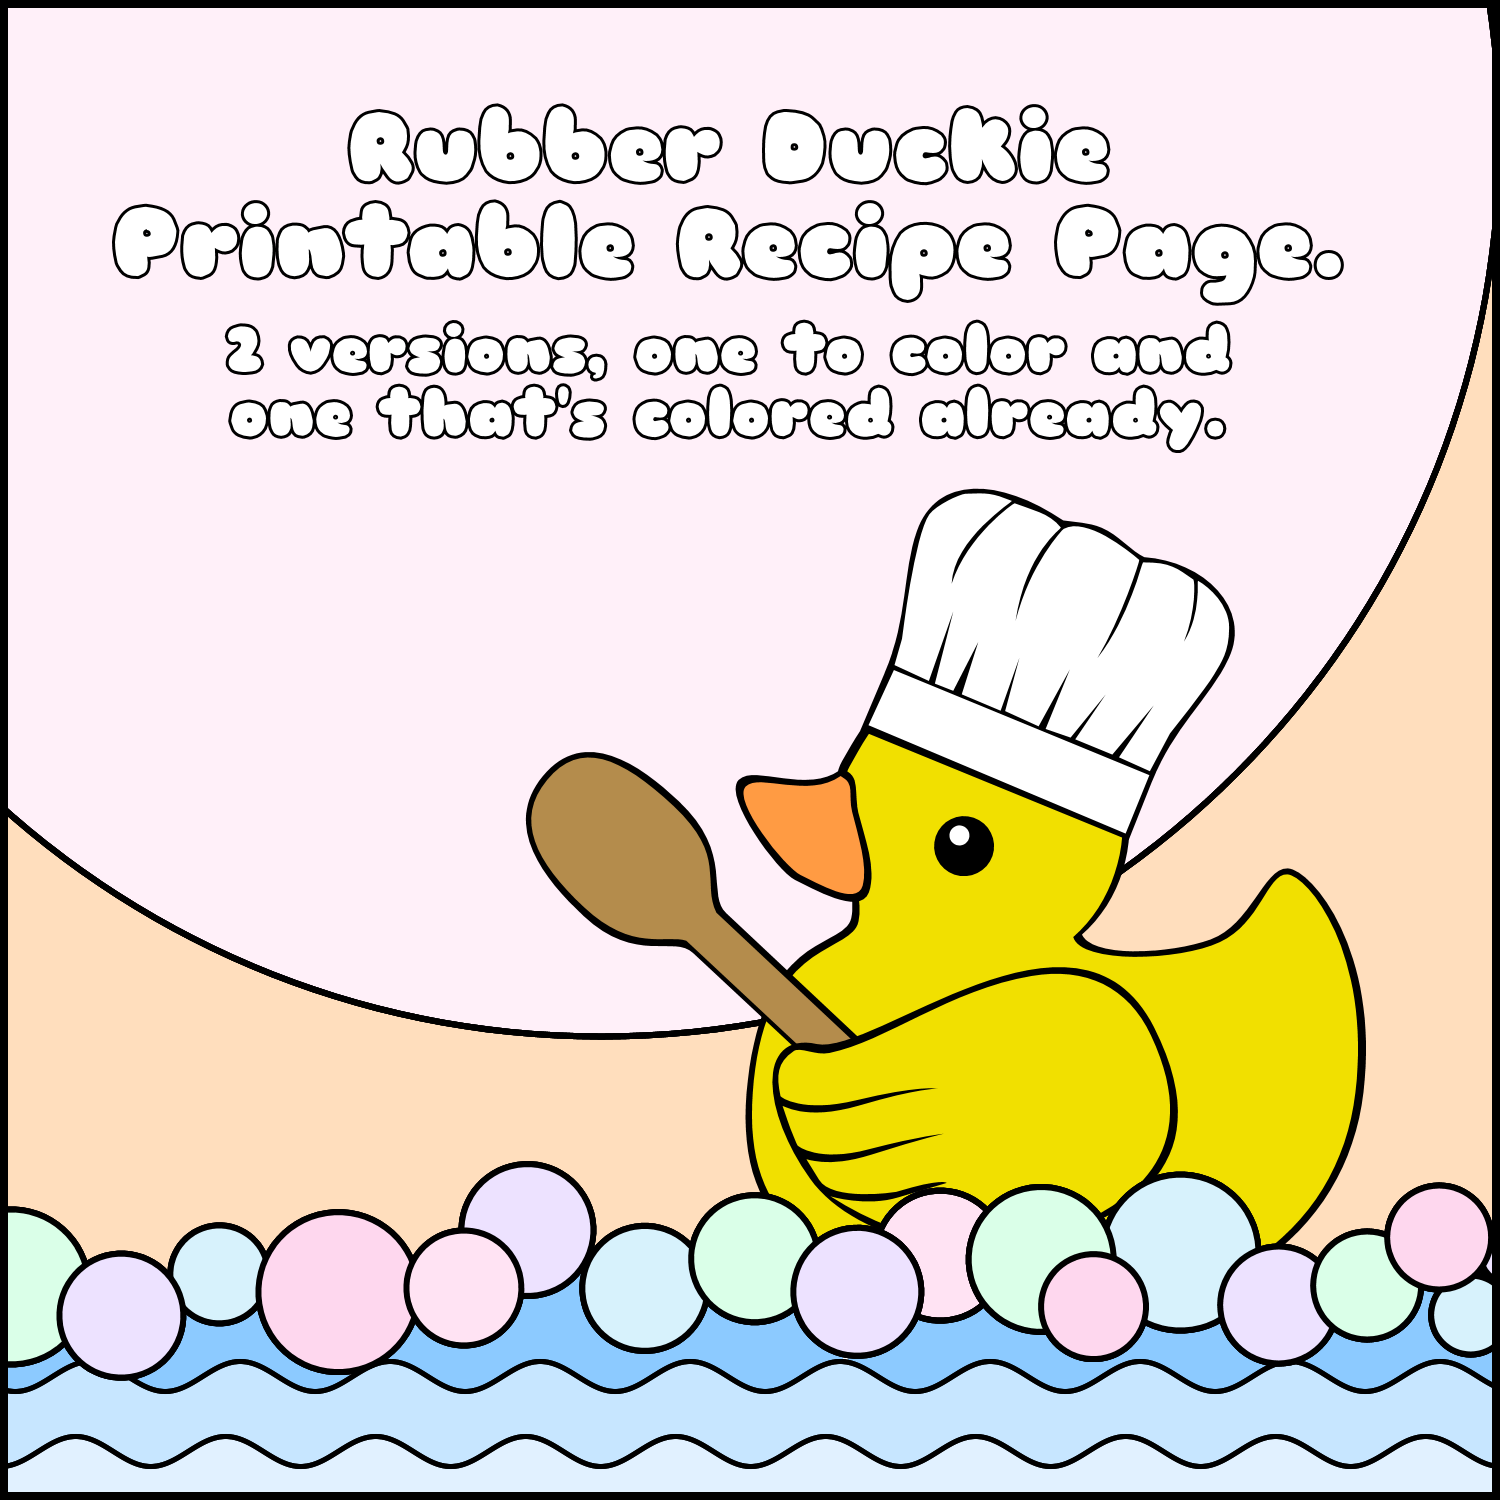 Rubber duck recipe page thumbnail